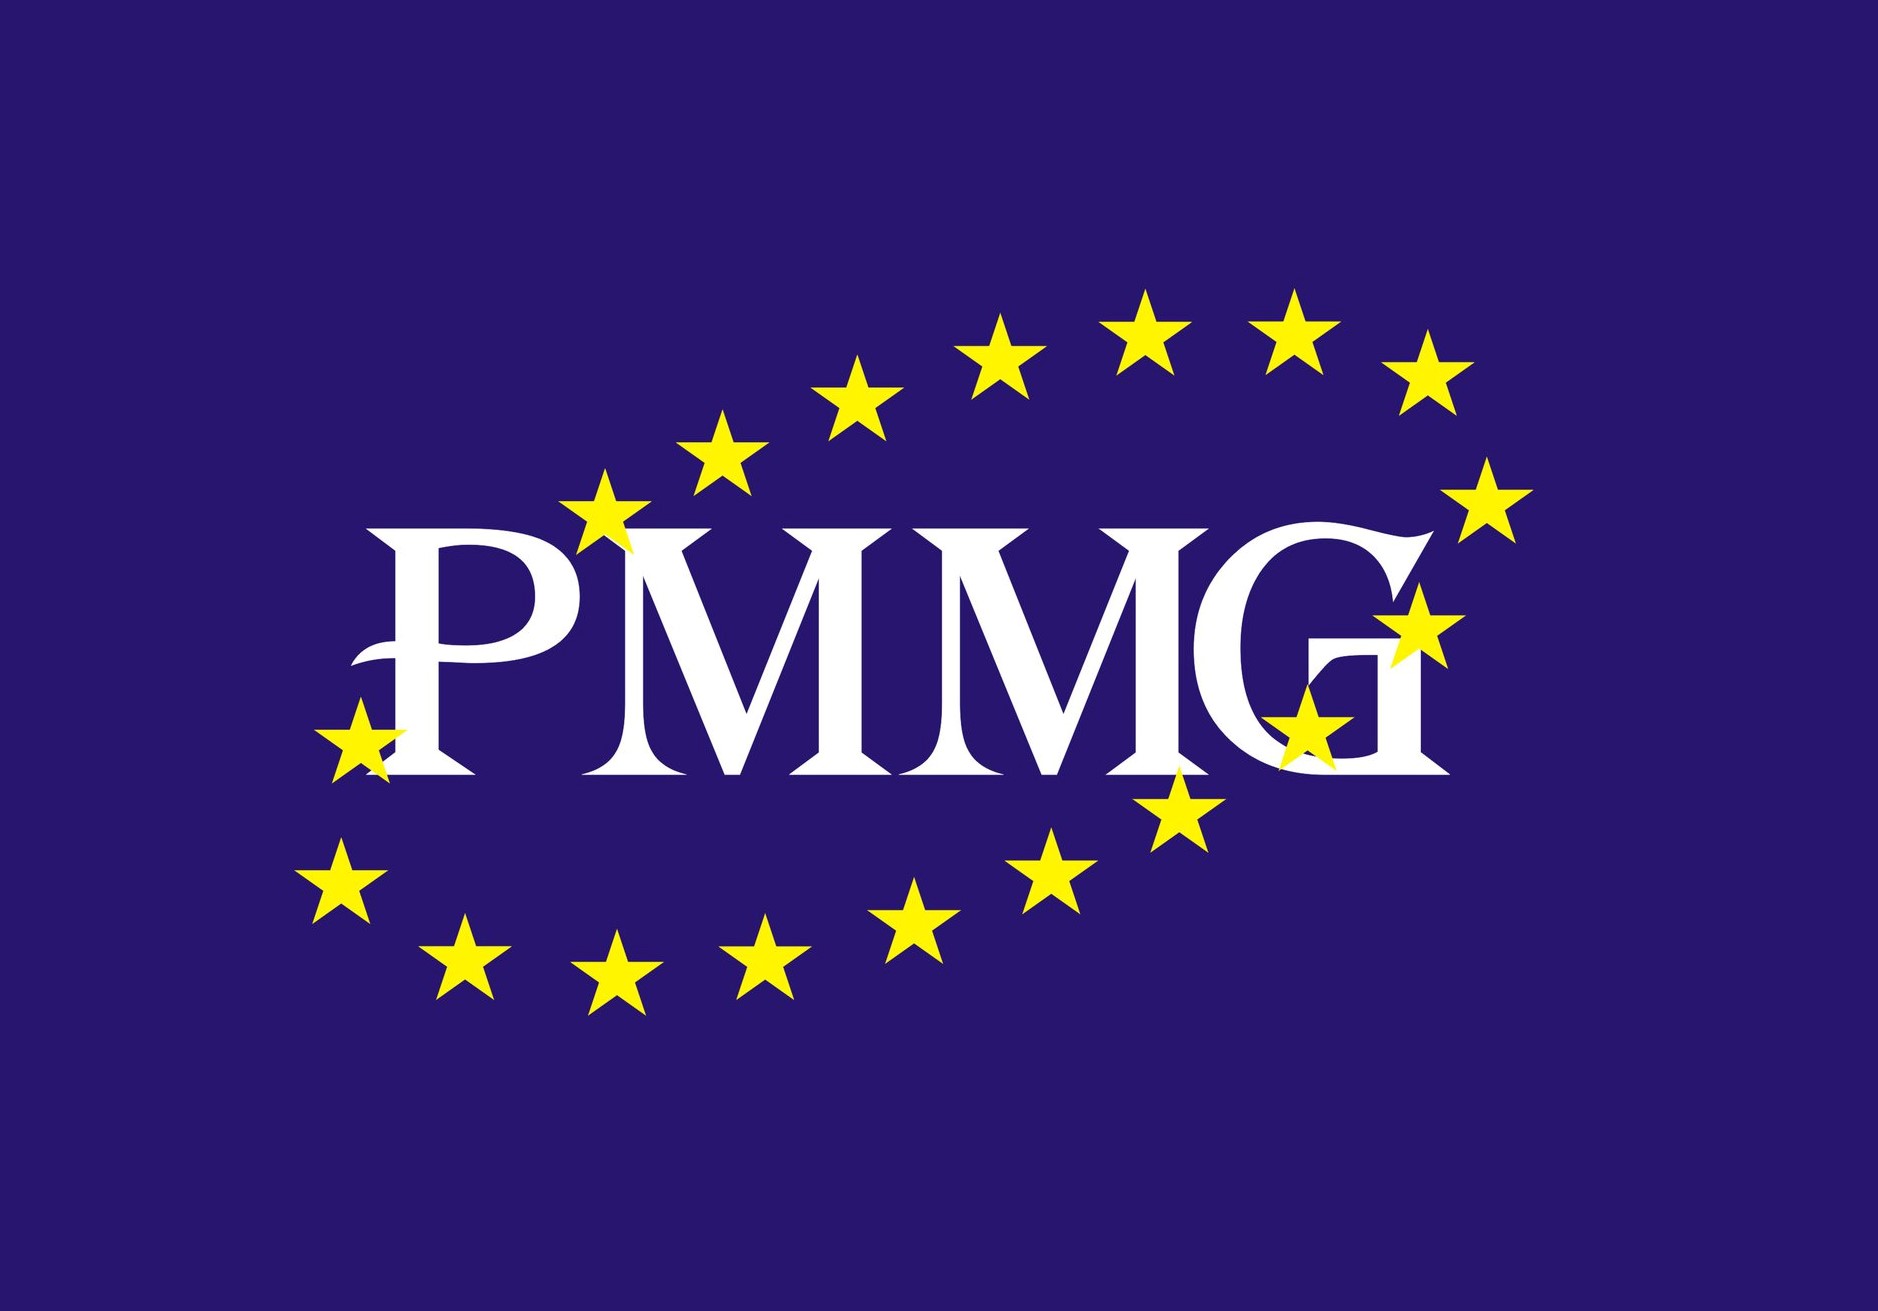 Statement by the Public Movement Multinational Georgia